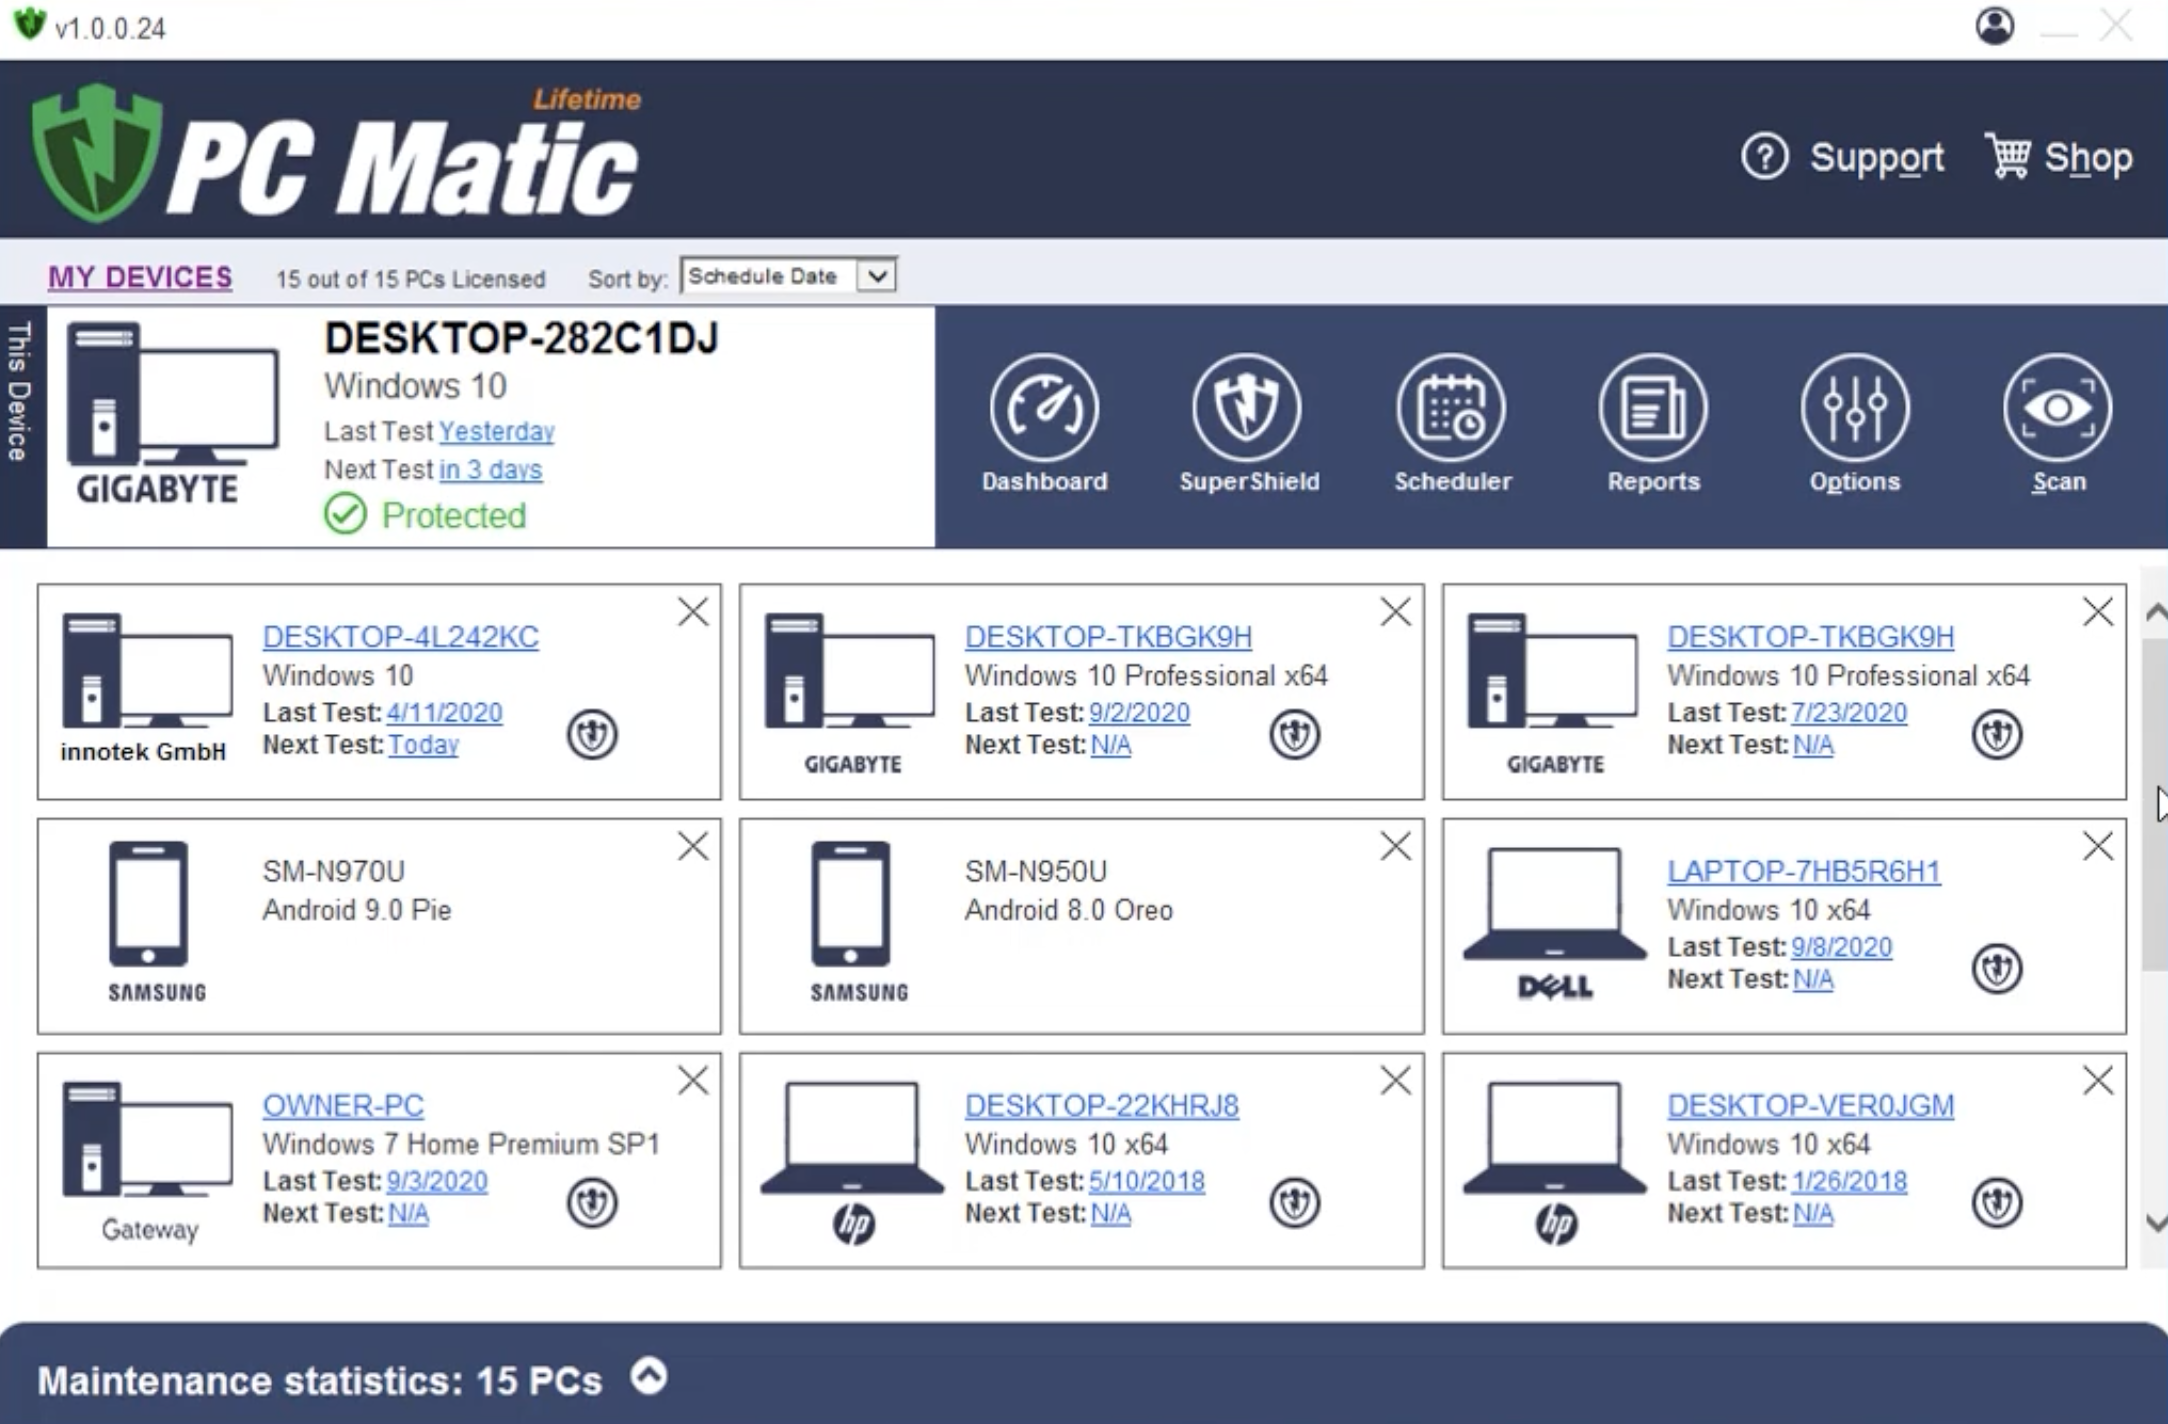 PC Matic 4.0 features a larger and more expansive user interface